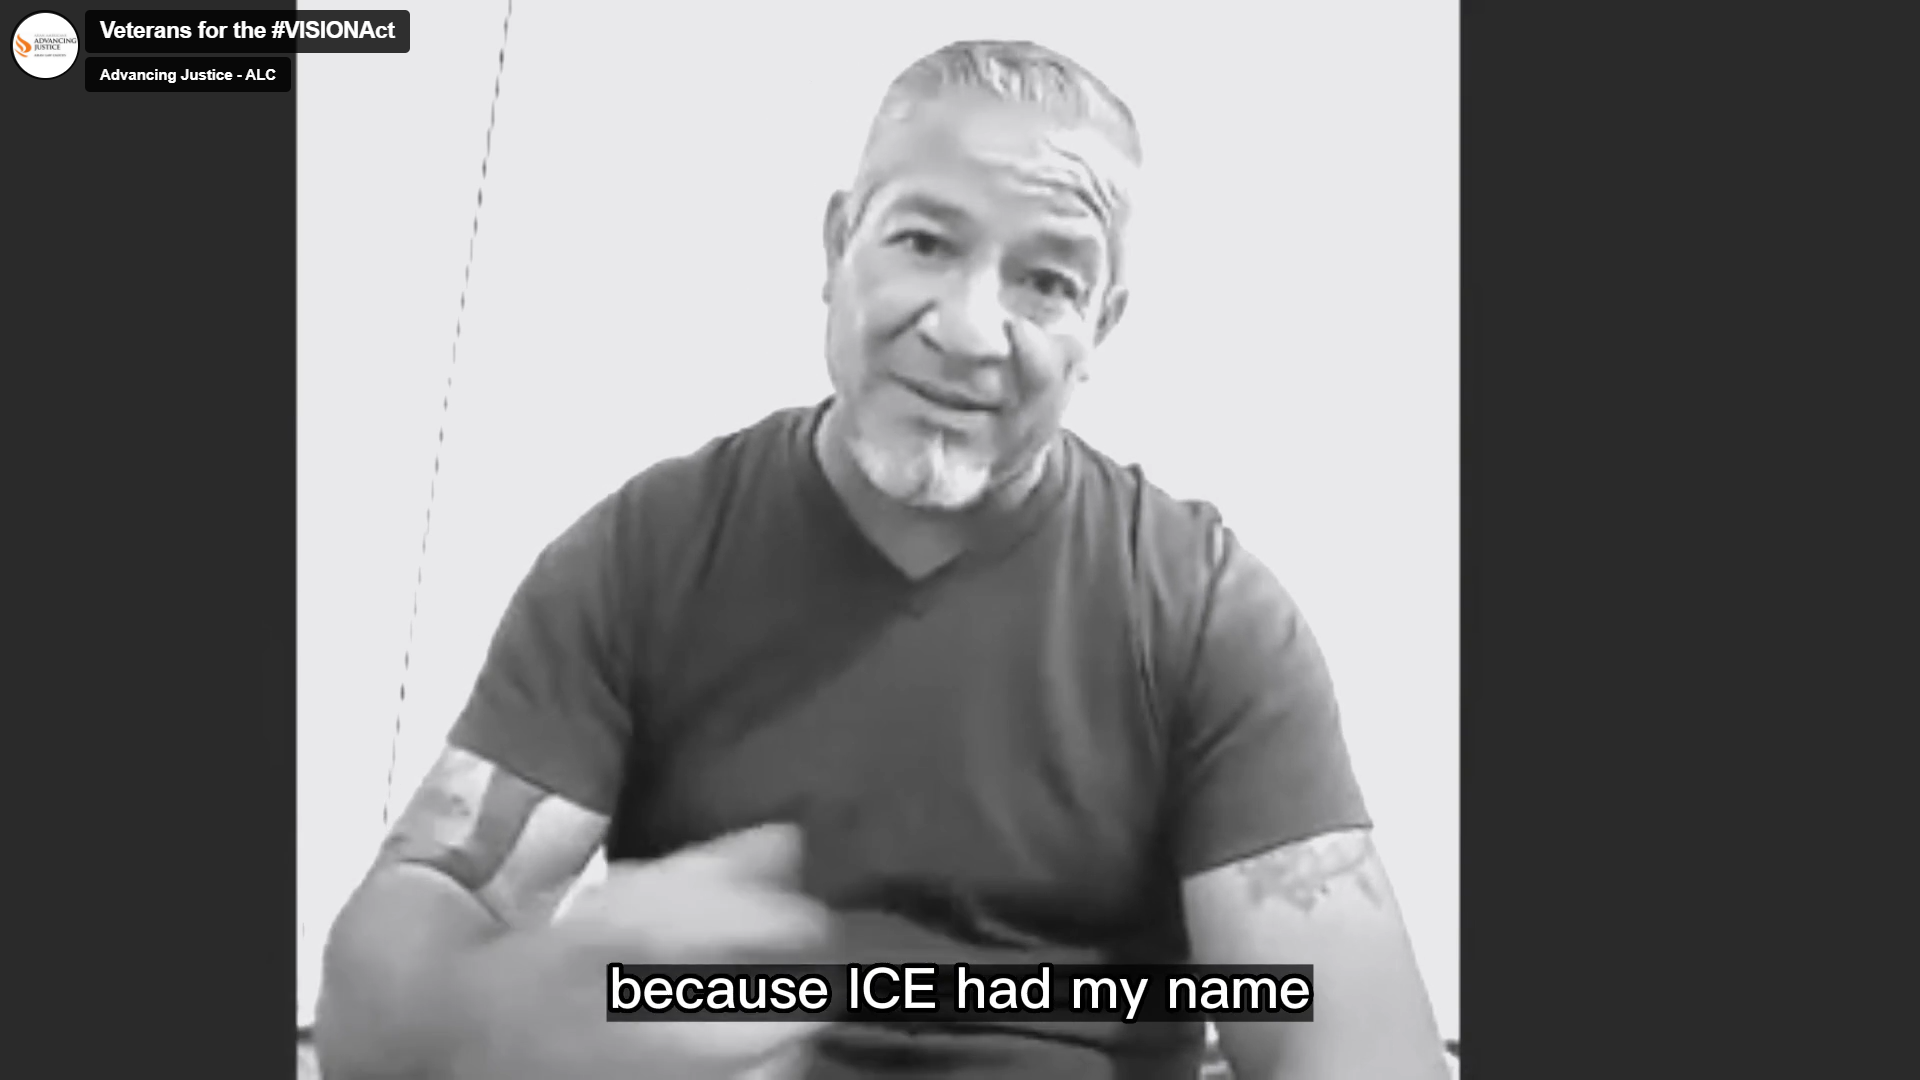 A video still of a veteran man with white hair and black T-shirt